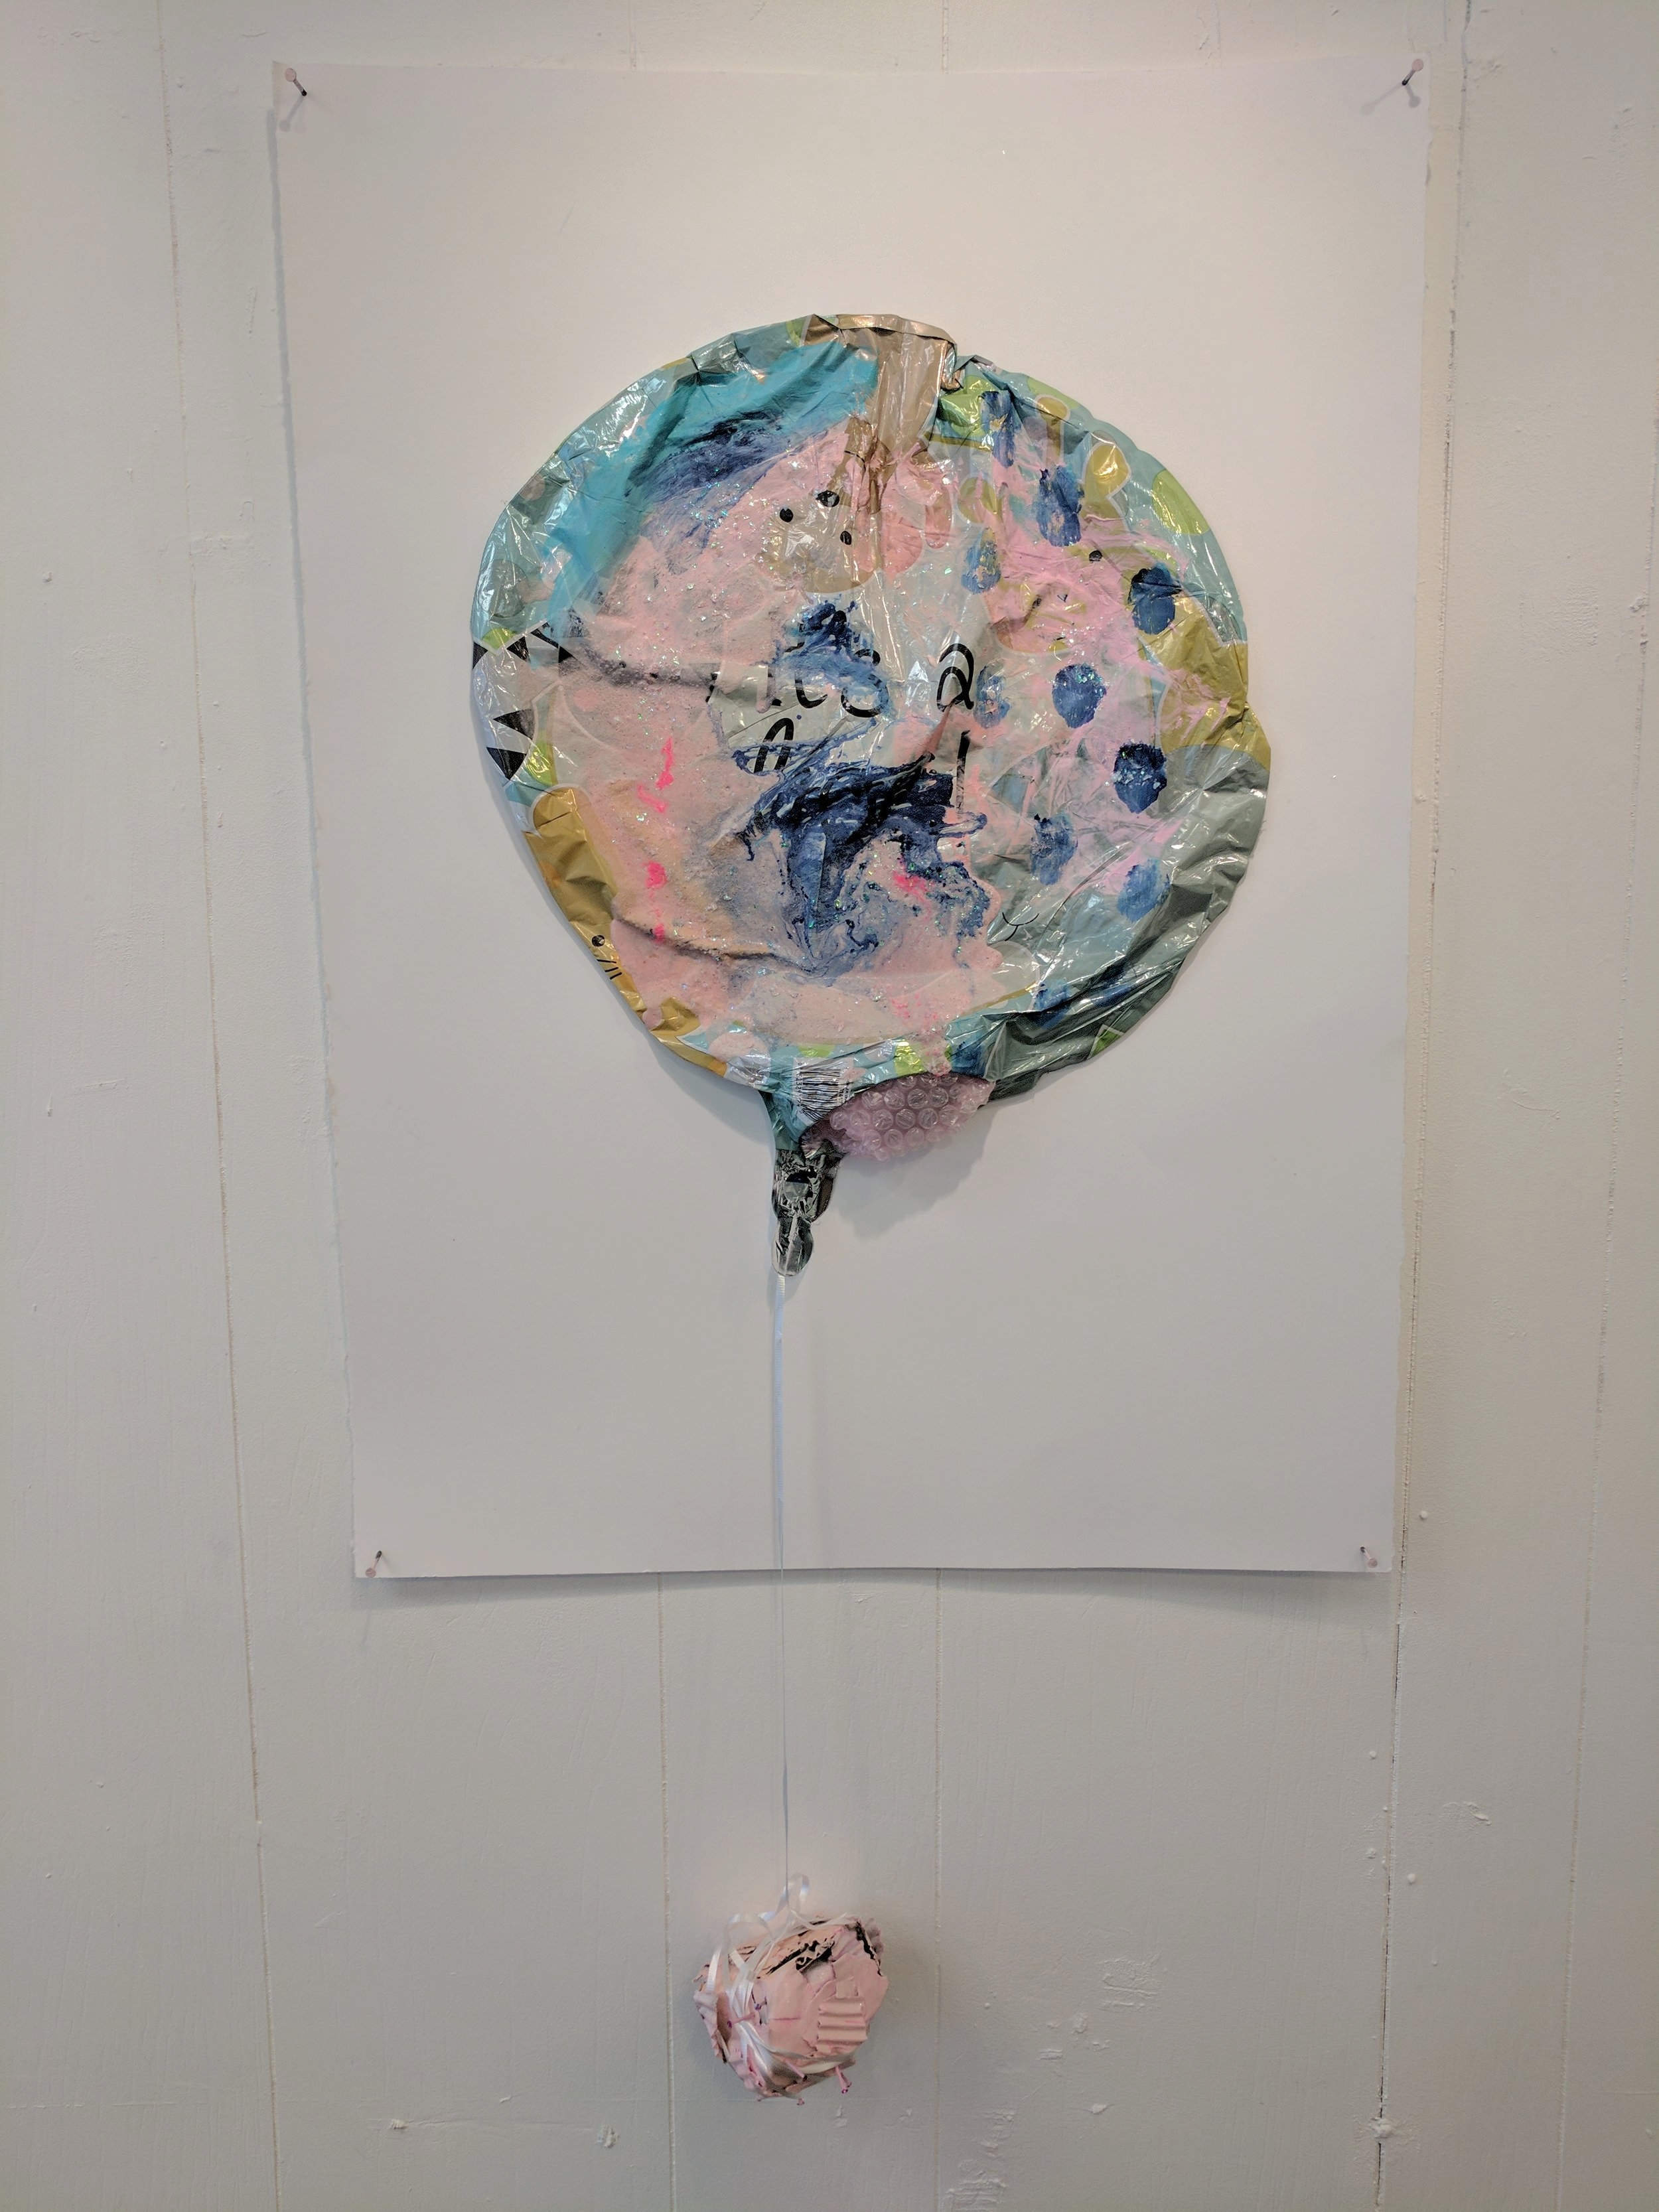   It's a Party 5   Balloon, acrylic, sugar paste, glitter, cardboard, and nails on paper  2017  From "Cry if I want 2" a collaborative show with Jessica Bingham  Her website: http://www.jessicabinghamart.com/ 